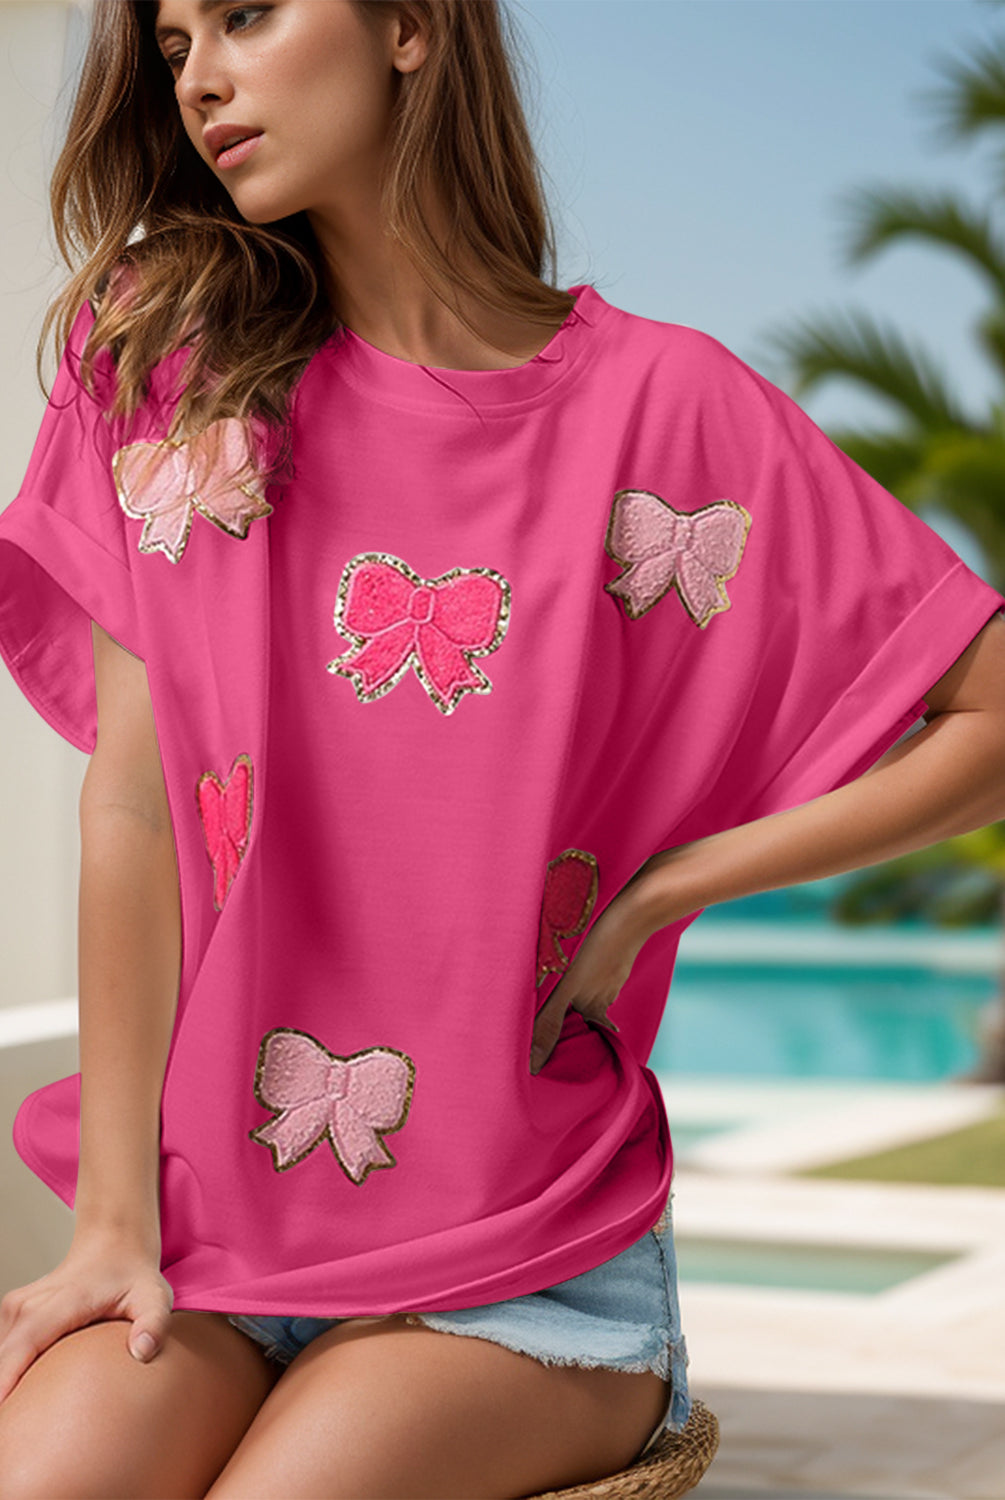 Three images of a woman wearing a sequin bow appliqué t-shirt, available in pink, white, and purple. Each shirt features decorative sequin bows, styled casually with denim shorts and worn by the model in a sunny, poolside setting.